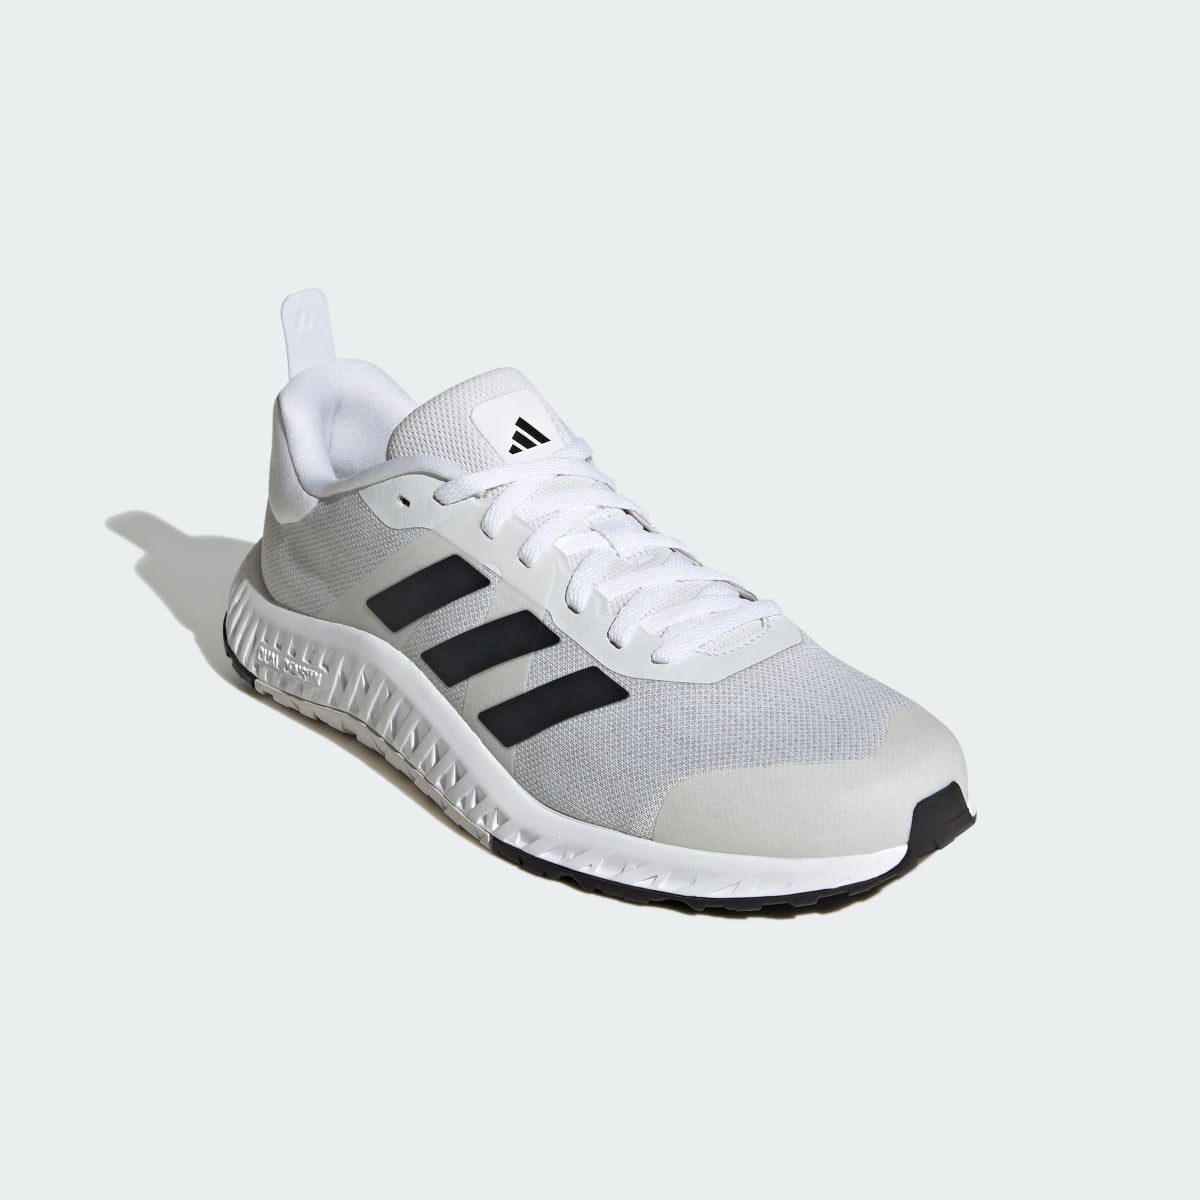 Adidas Everyset Trainer Shoes. 5